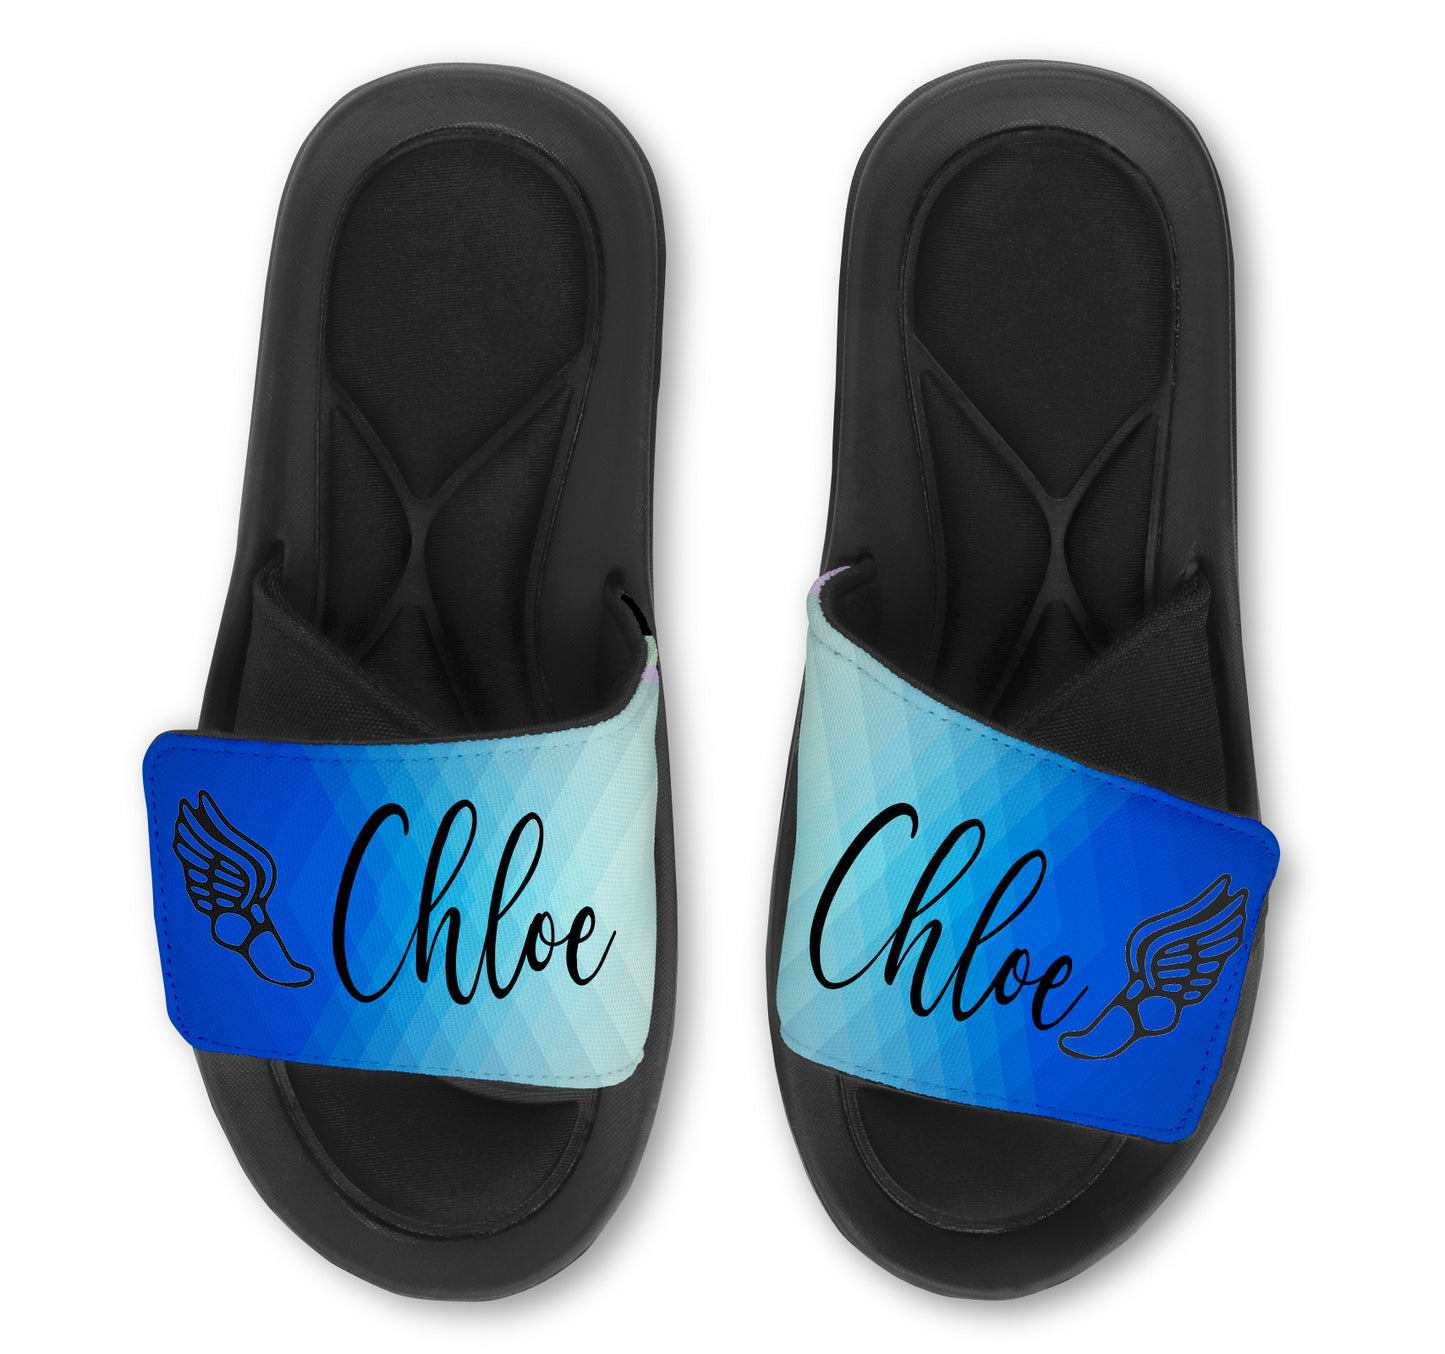 TRACK Abstract Custom Slides / Sandals - Choose your Background!